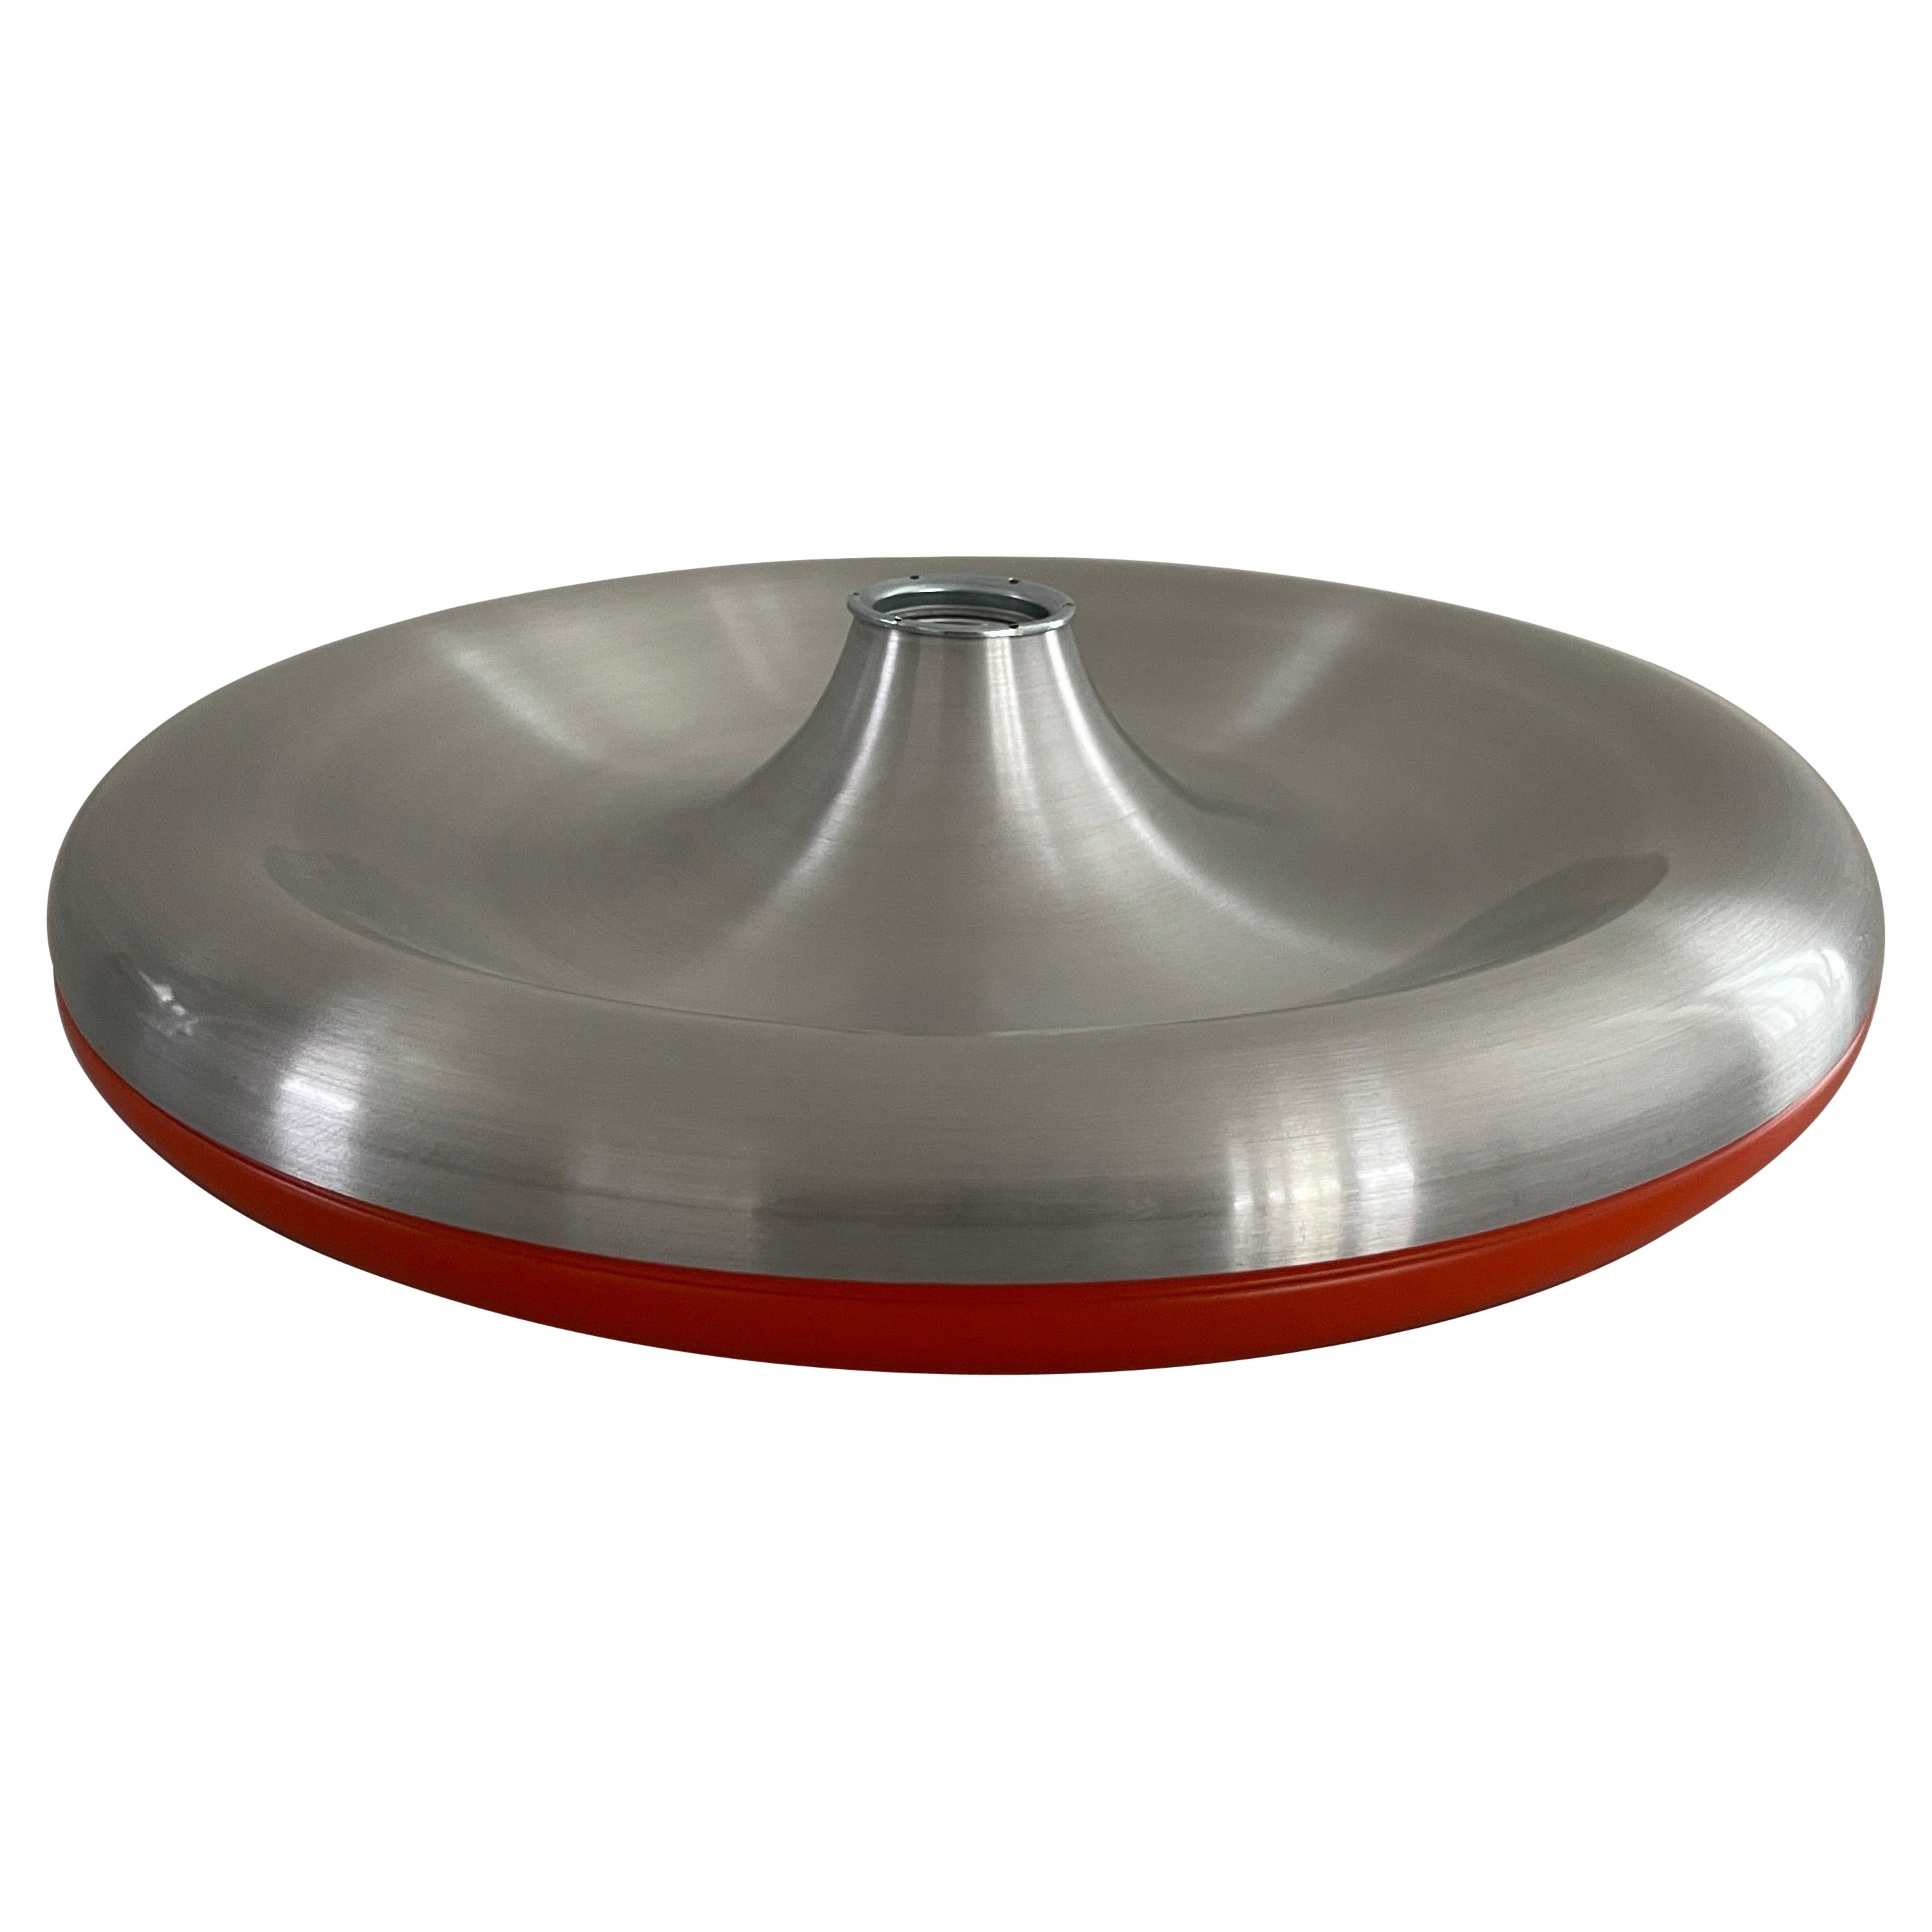 Metallic Grey and Orange Space Age Flush Mount Ceiling Lamp, 1970s, Germany